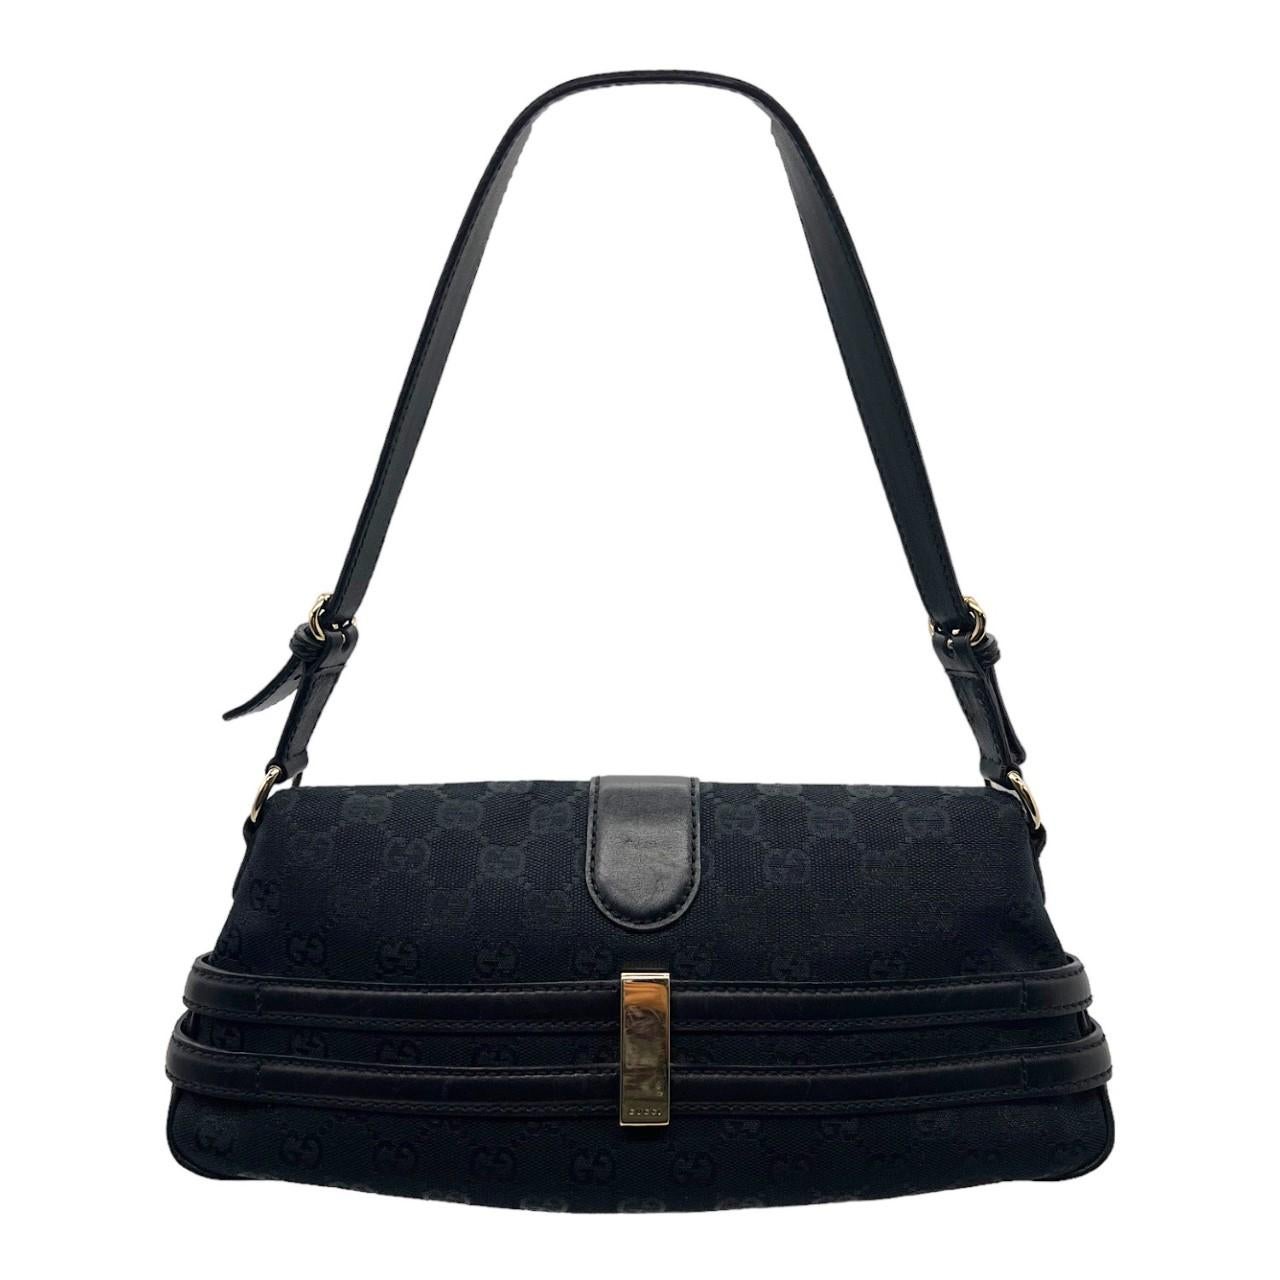 We are offering this black Gucci horsebit handbag. Made in Italy, it is crafted of black Gucci monogram canvas with black leather trims and silver-tone hardware accents. It has an adjustable black leather handle and it features an open fold-over